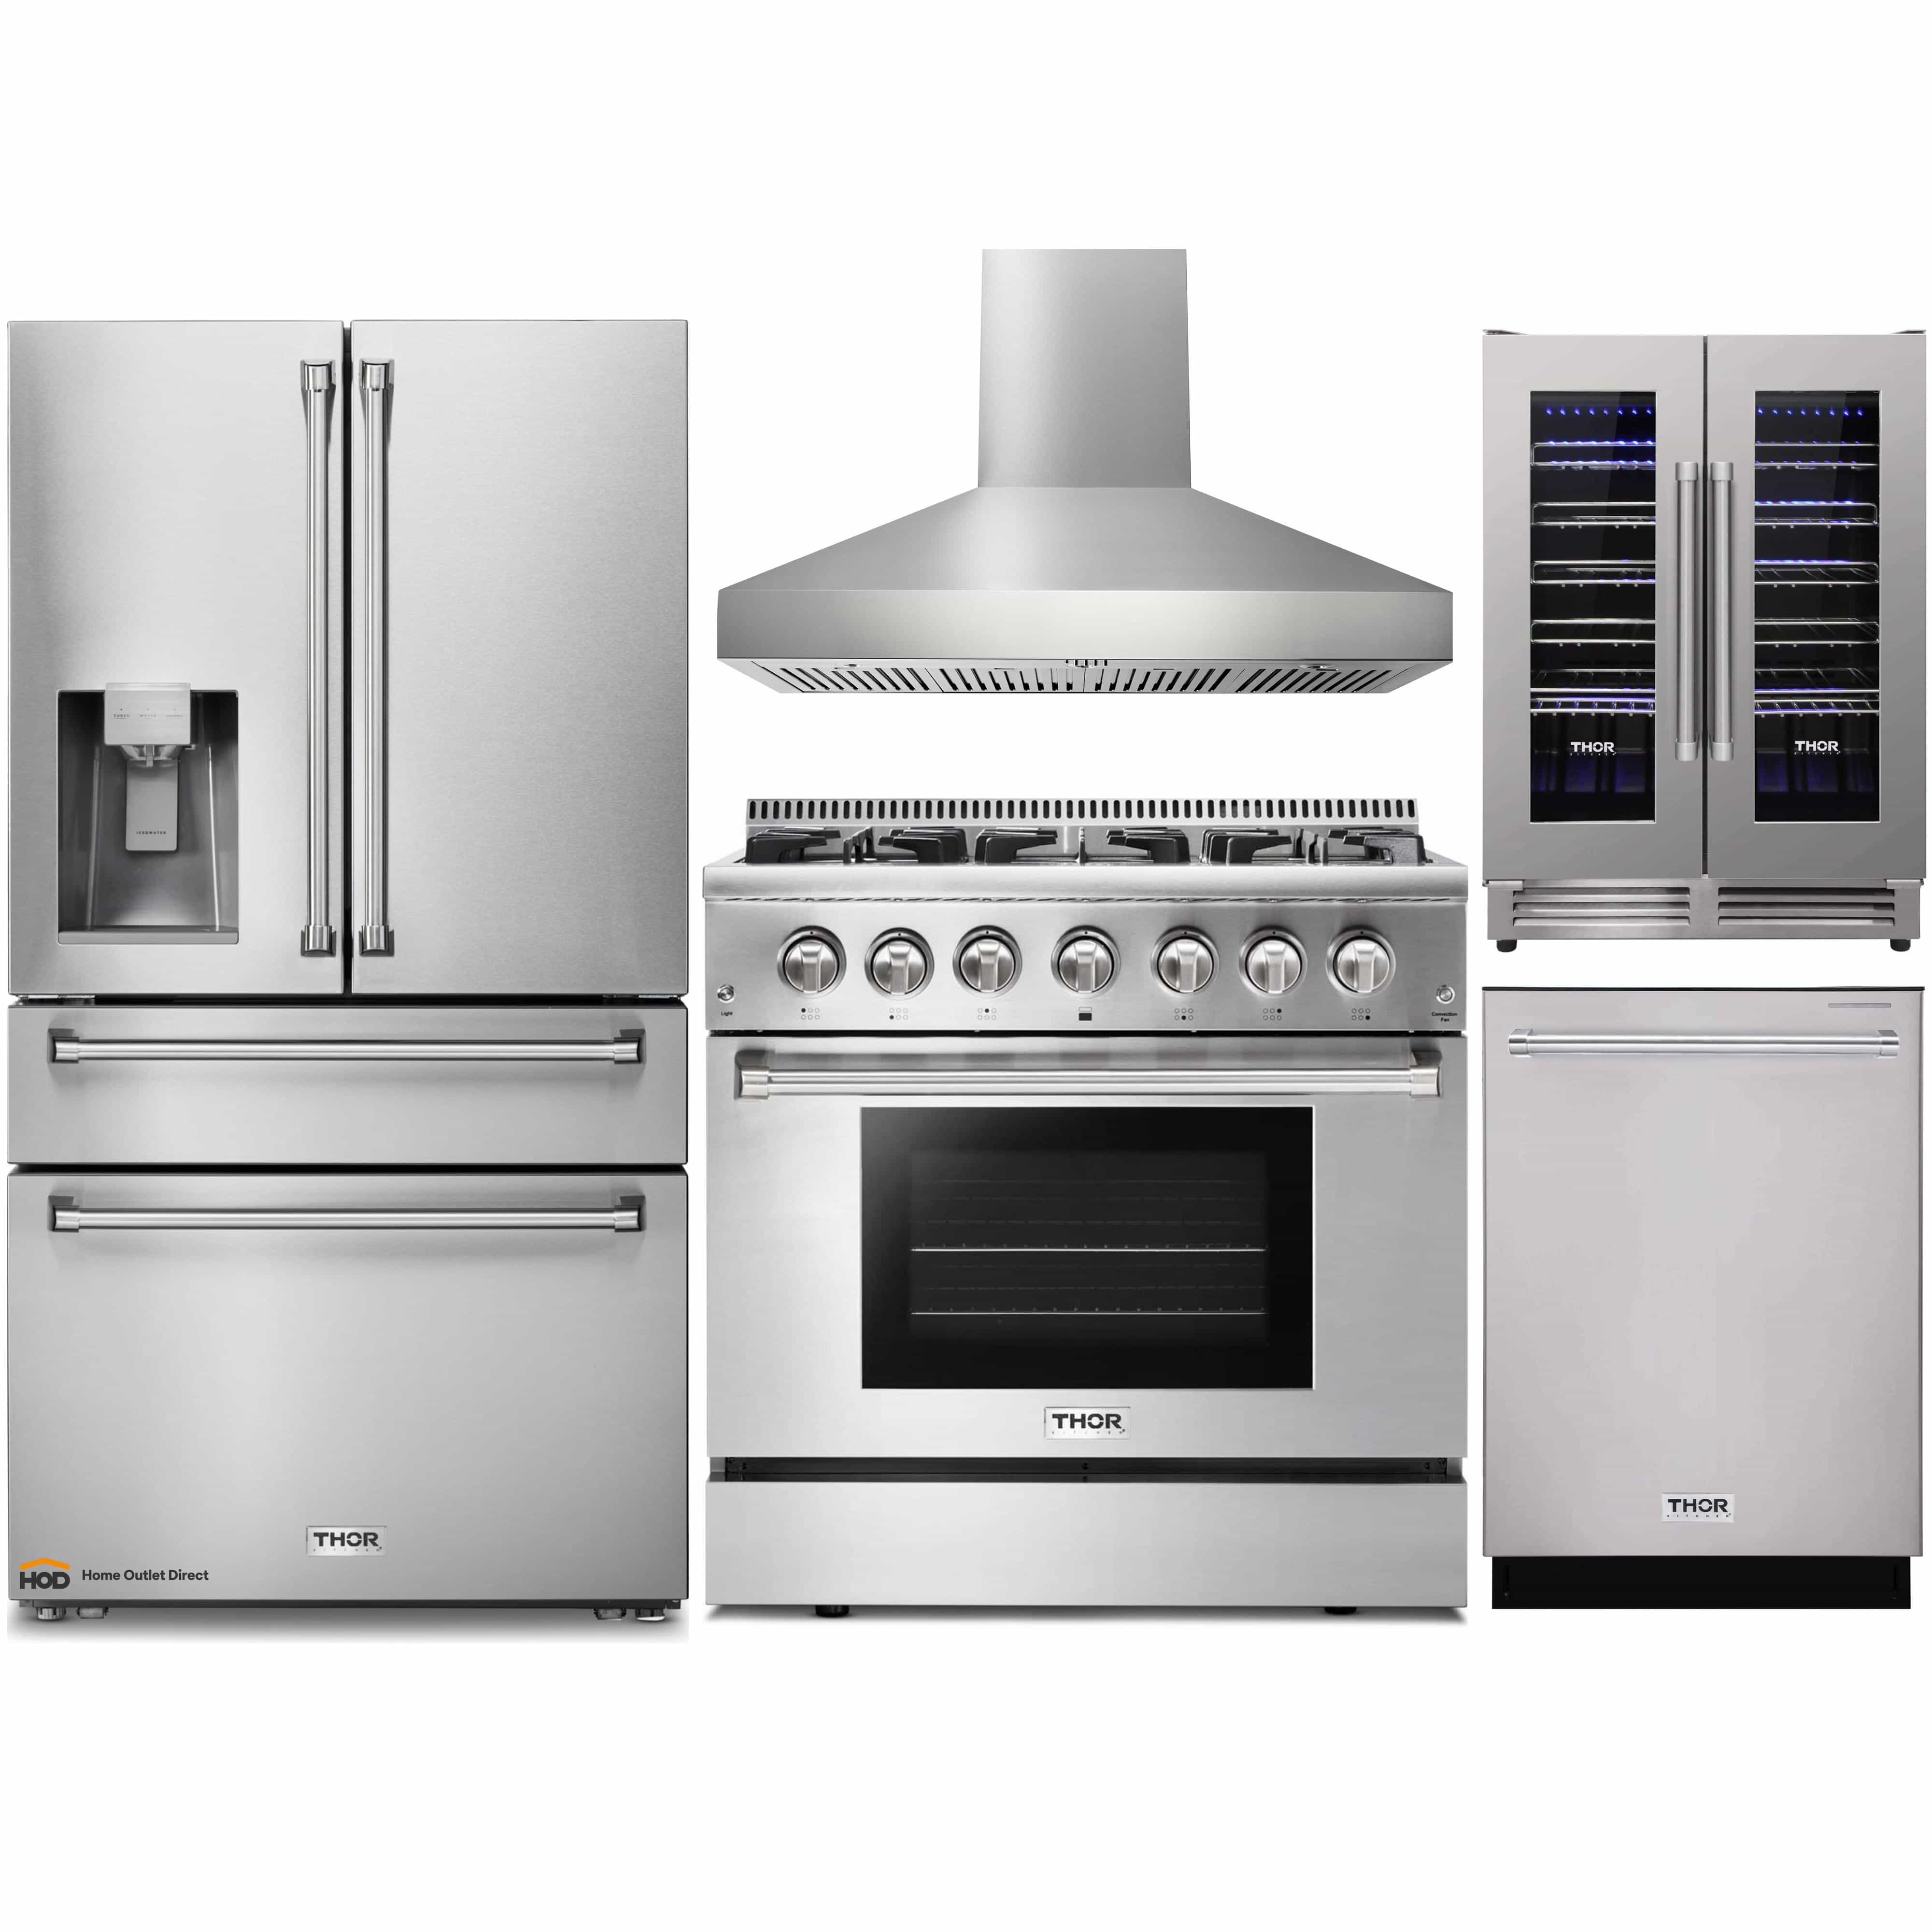 Thor Kitchen 5-Piece Pro Appliance Package - 36-Inch Dual Fuel Range, Refrigerator with Water Dispenser, Pro-Style Wall Mount Hood, Dishwasher, & Wine Cooler in Stainless Steel